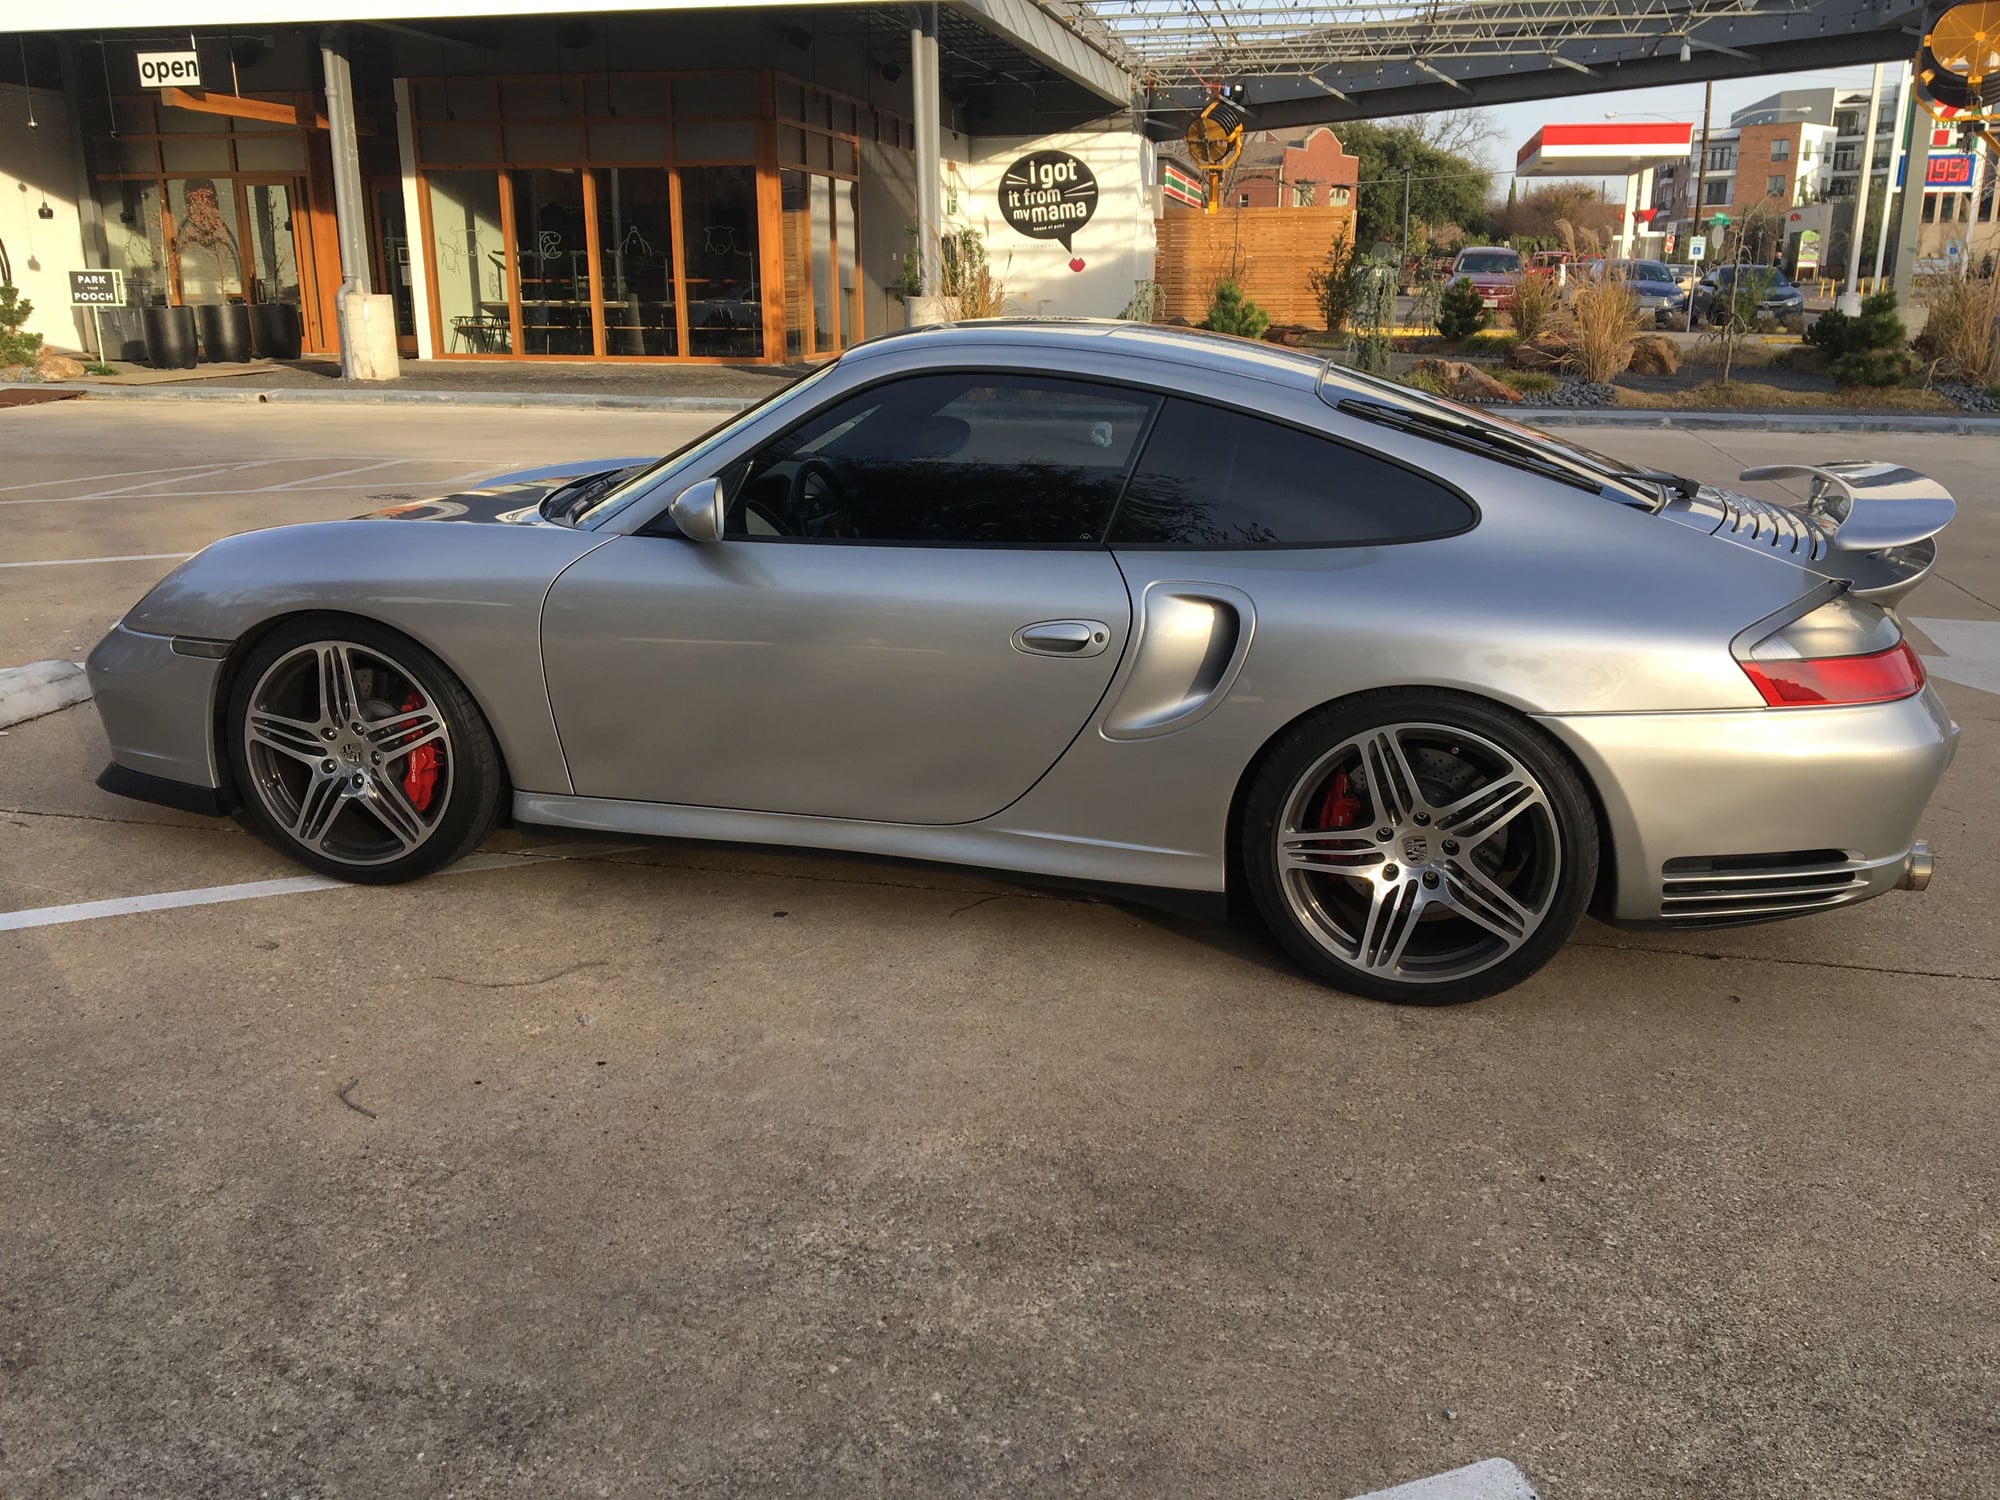 2001 Porsche 911 - 2001 Porsche 996 Turbo Six Speed - Used - VIN WP0AB29951S685078 - 91,312 Miles - 6 cyl - AWD - Manual - Coupe - Silver - Dallas, TX 75206, United States